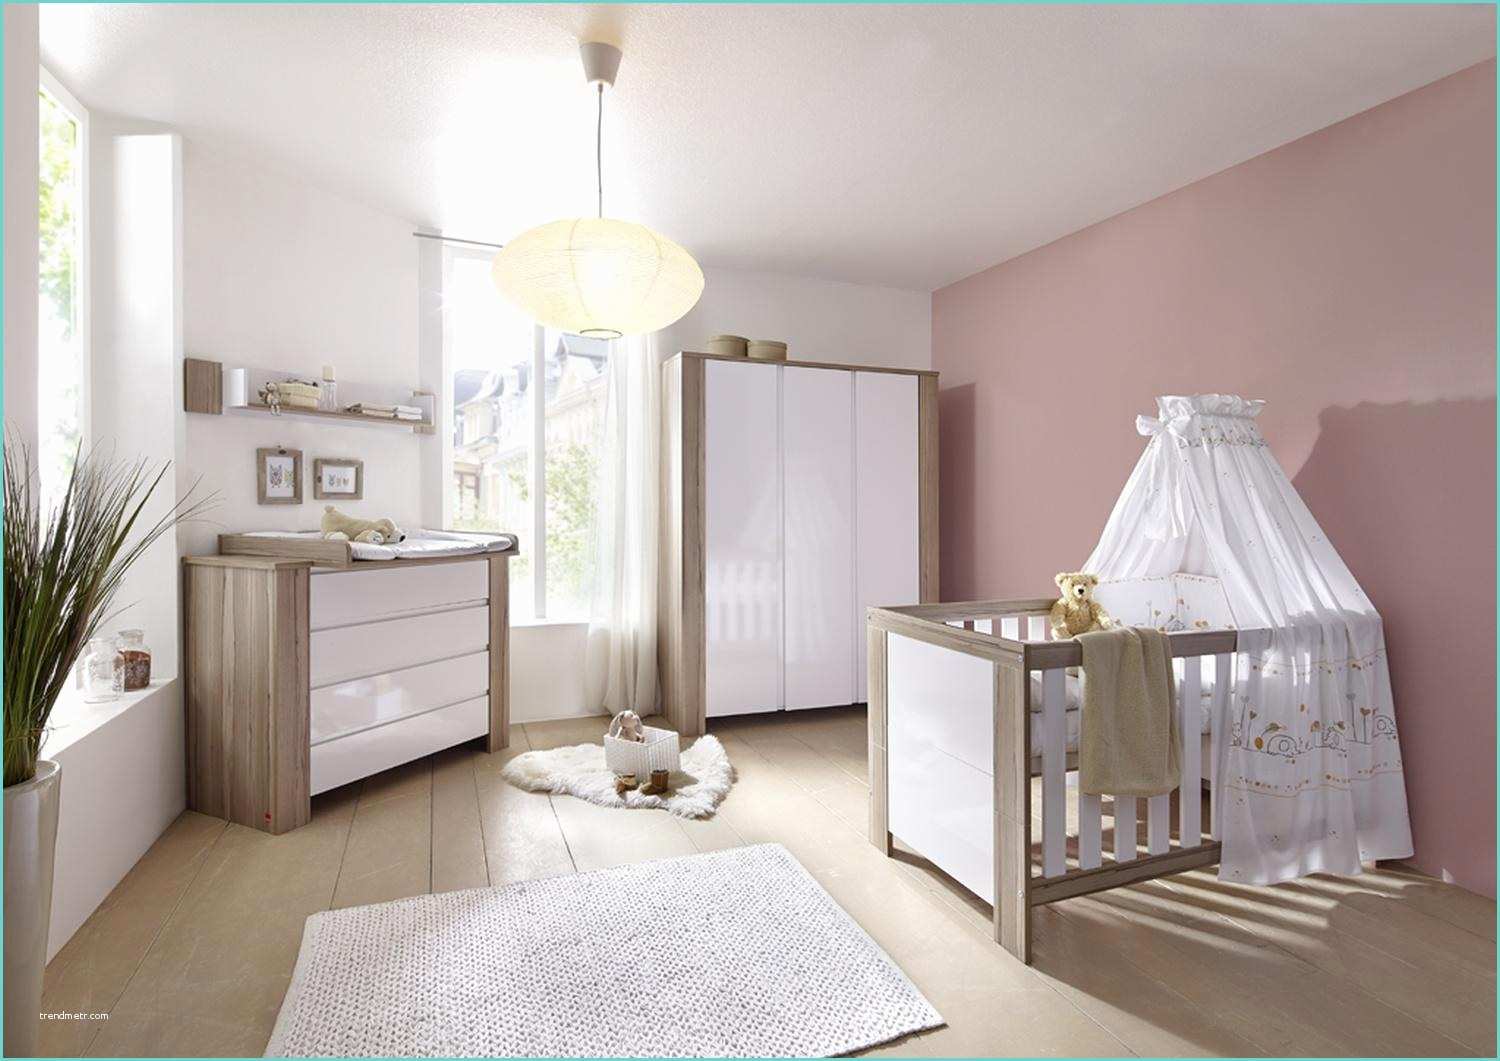 Dcoration Chambre Bb Fille Moderne Awesome Chambre Moderne Fille Ideas Seiunkel